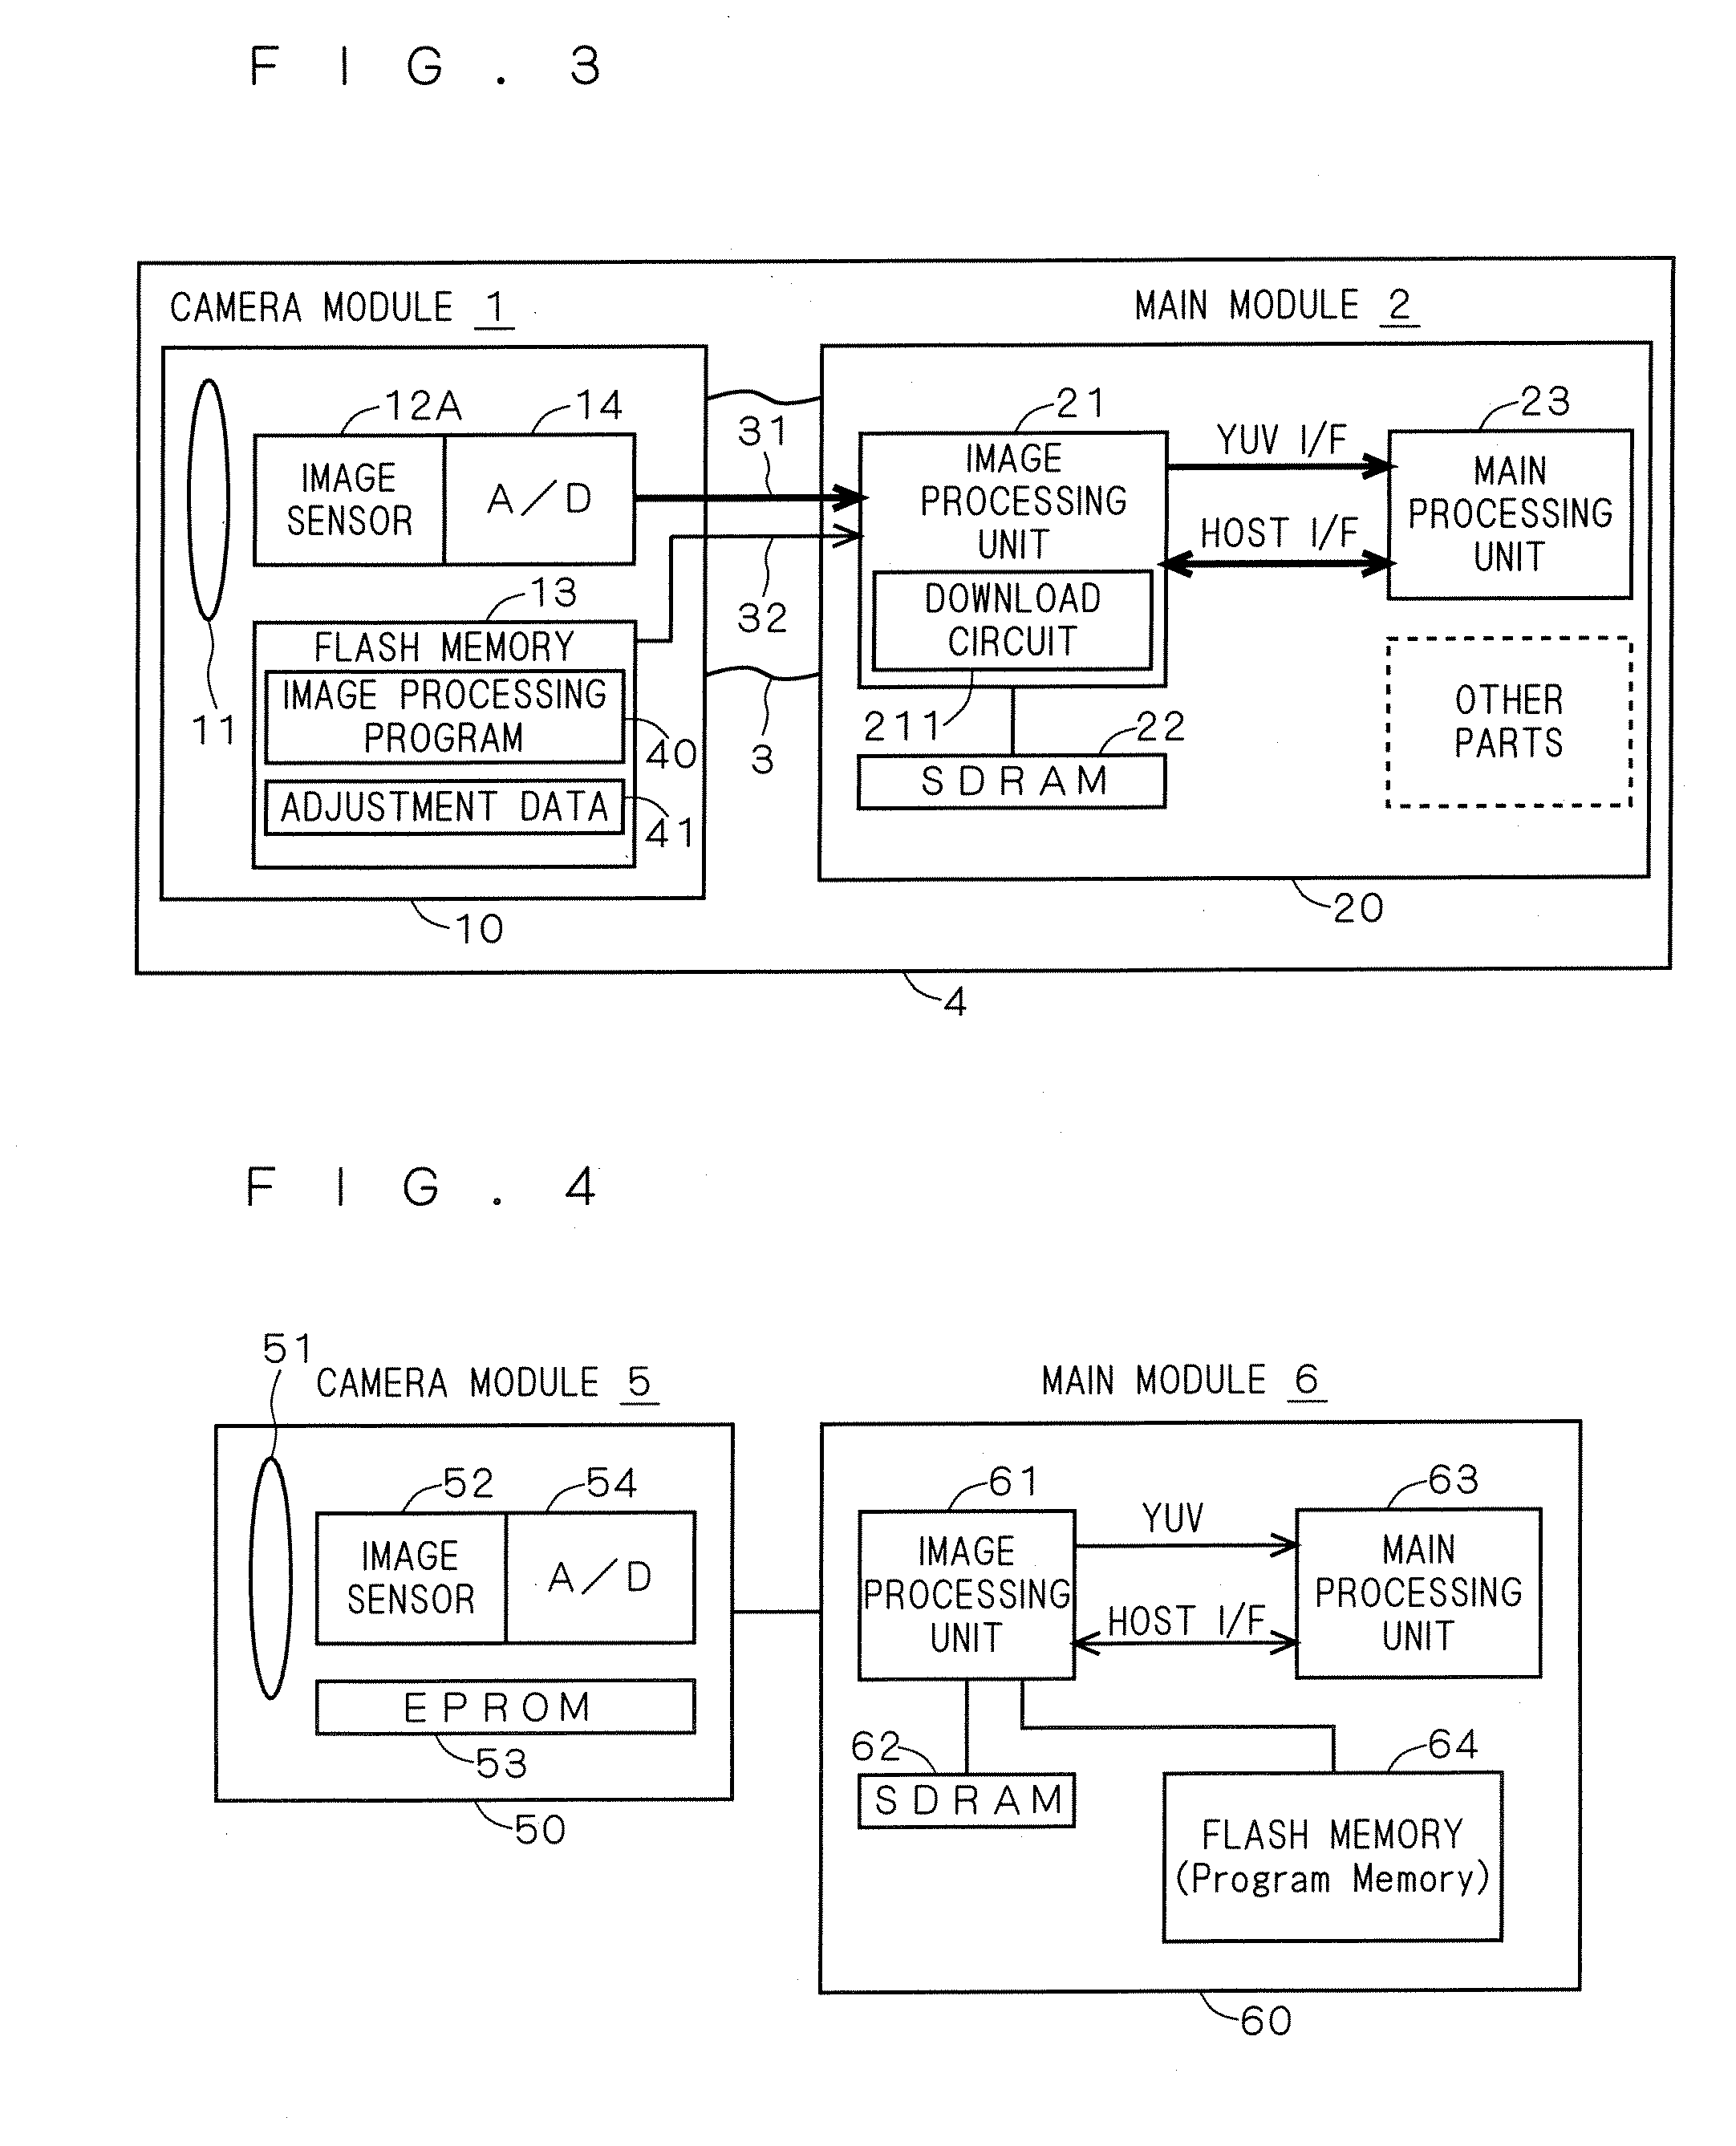 Electronic device with camera and main module incorporated in electronic device with camera